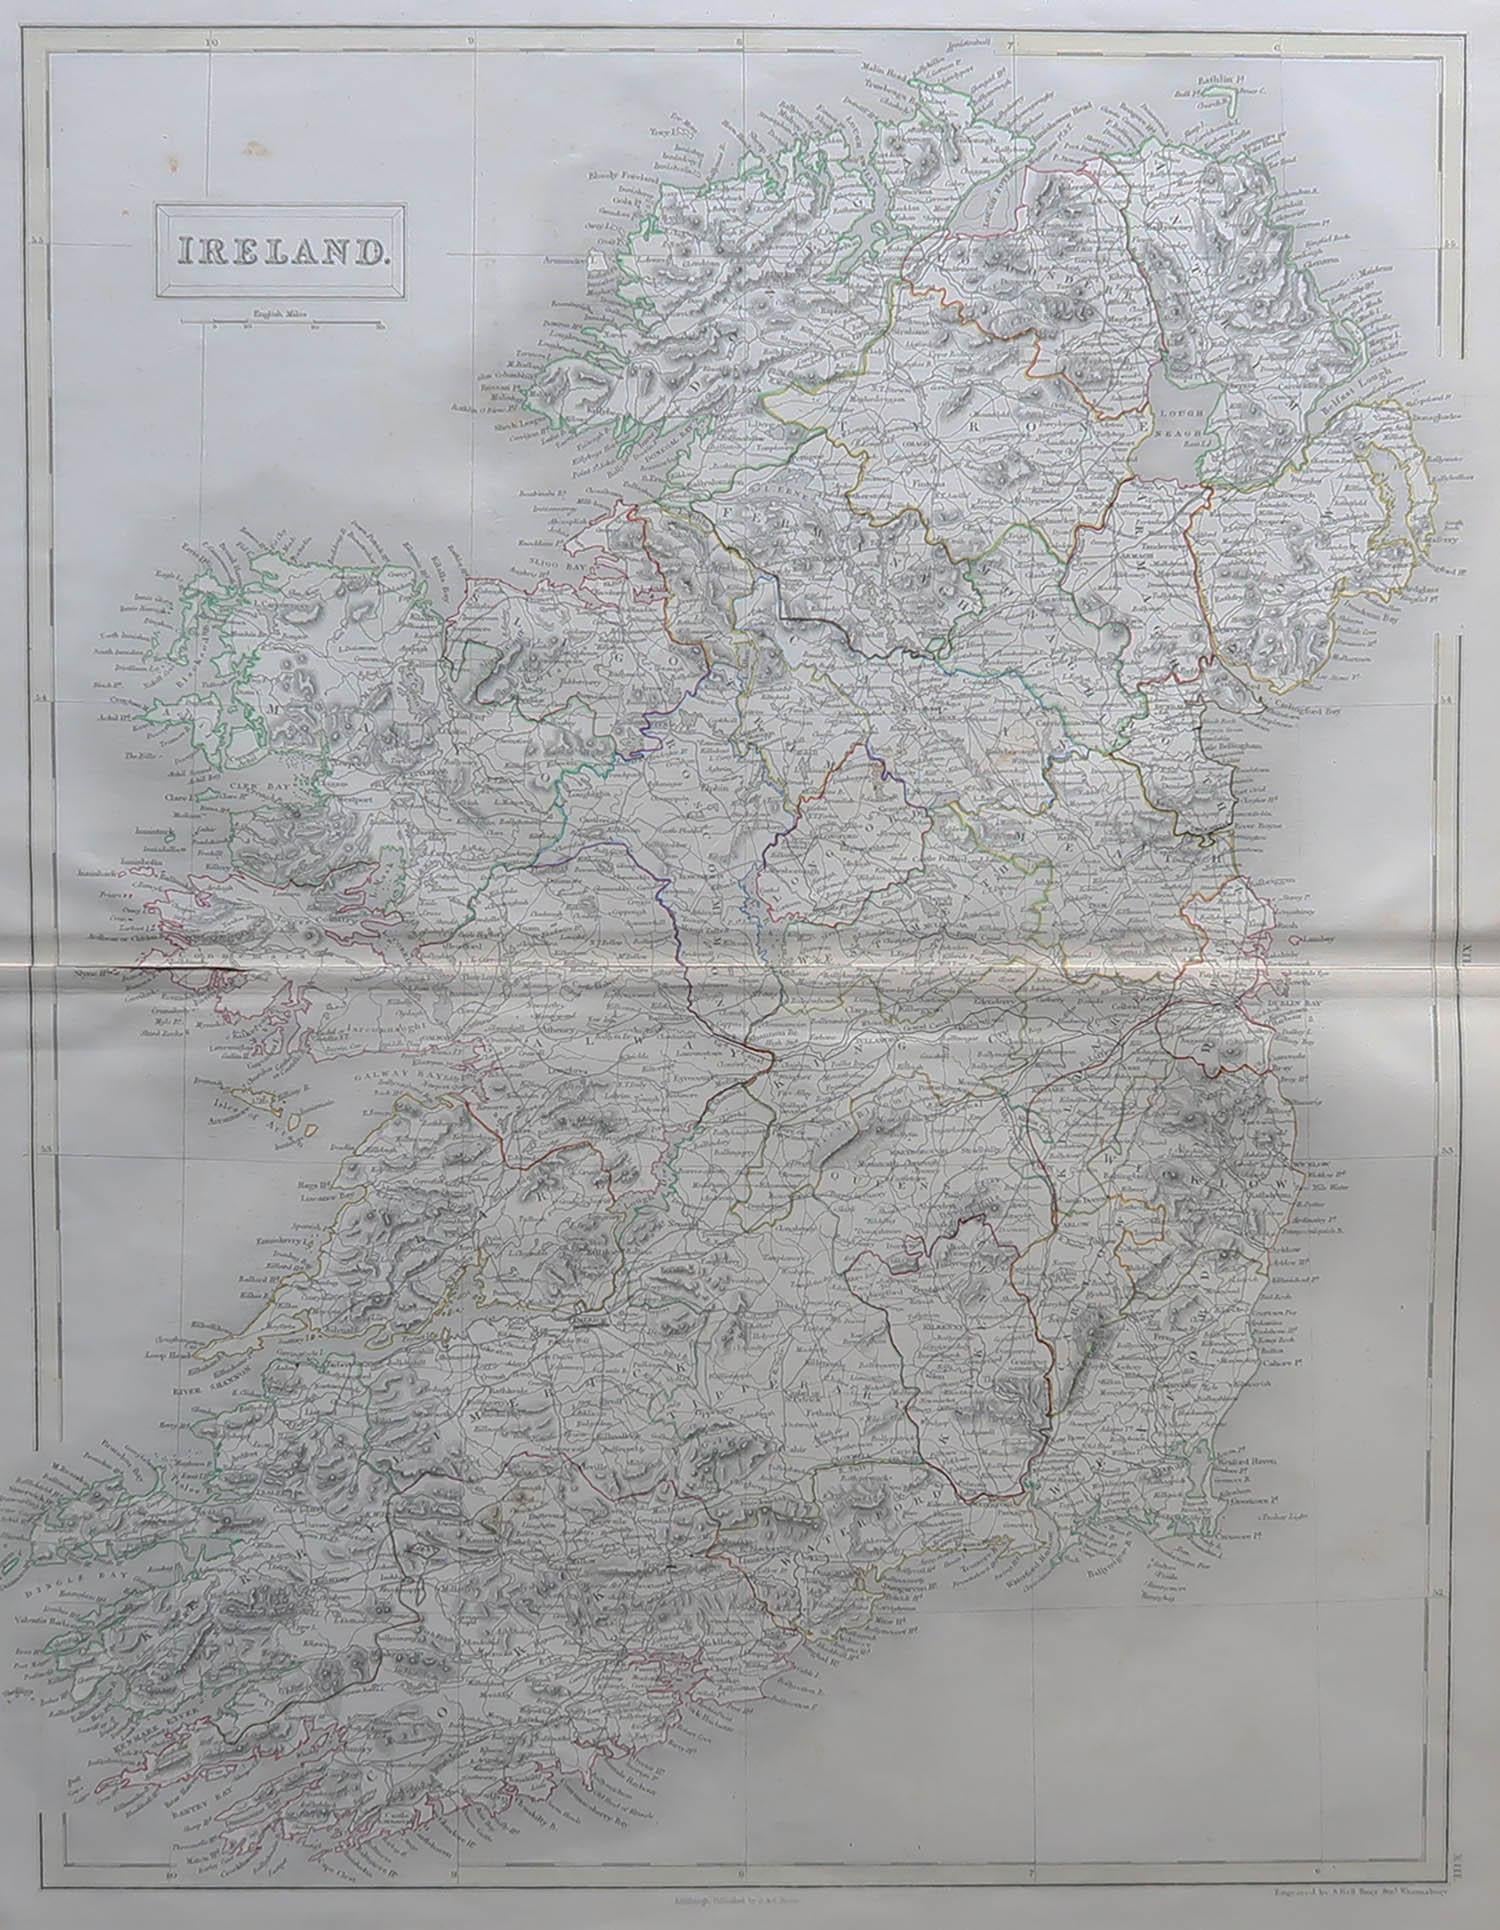 Great map of Ireland

Drawn and engraved by Sidney Hall

Steel engraving 

Original colour outline

Published by A & C Black. 1847

Unframed

Free shipping.

